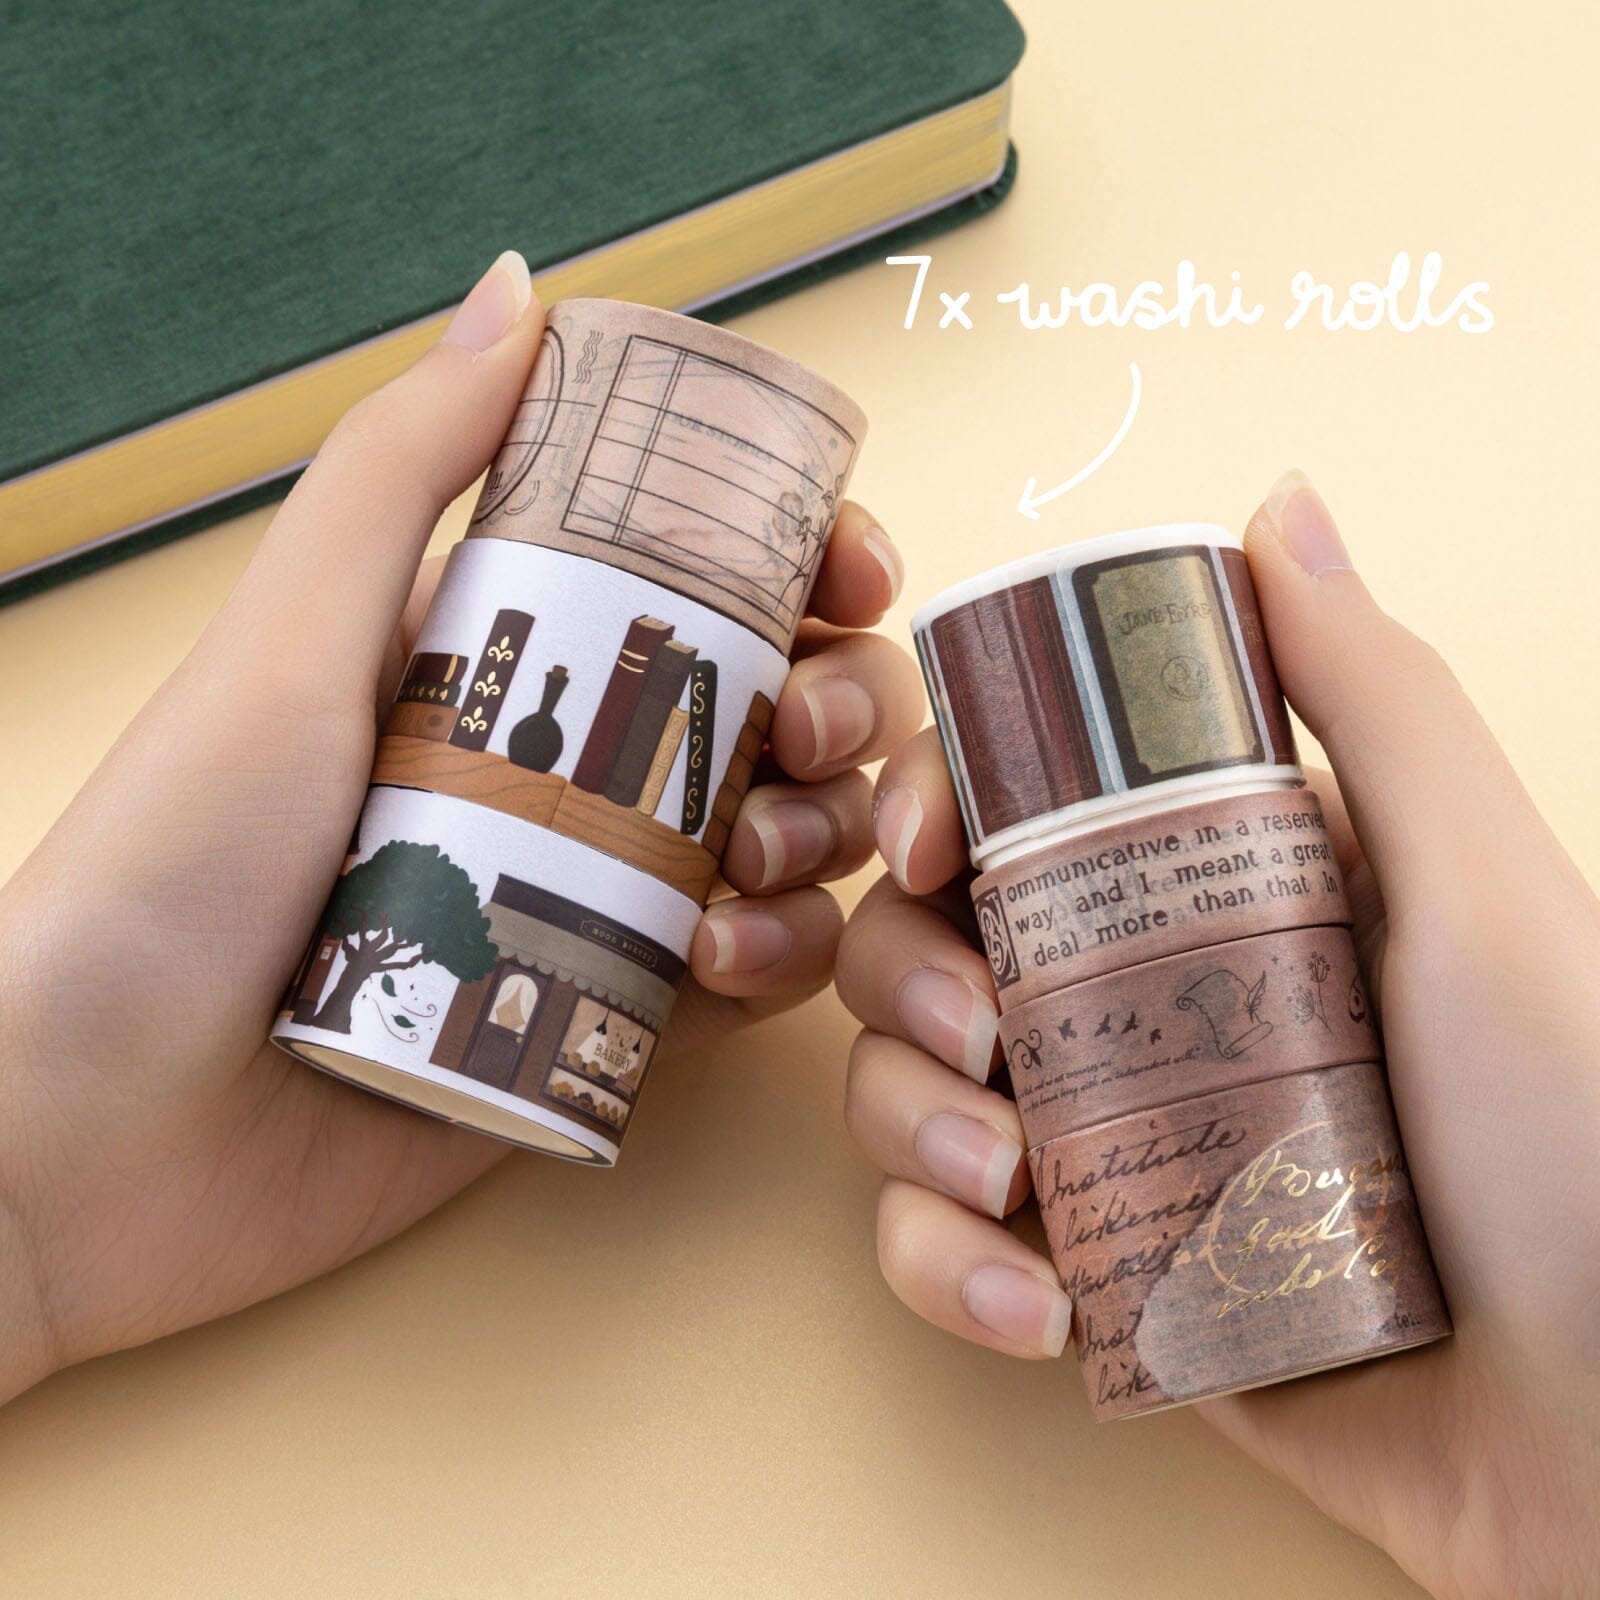 Hands holding 7x washi rolls with bookstagram designs